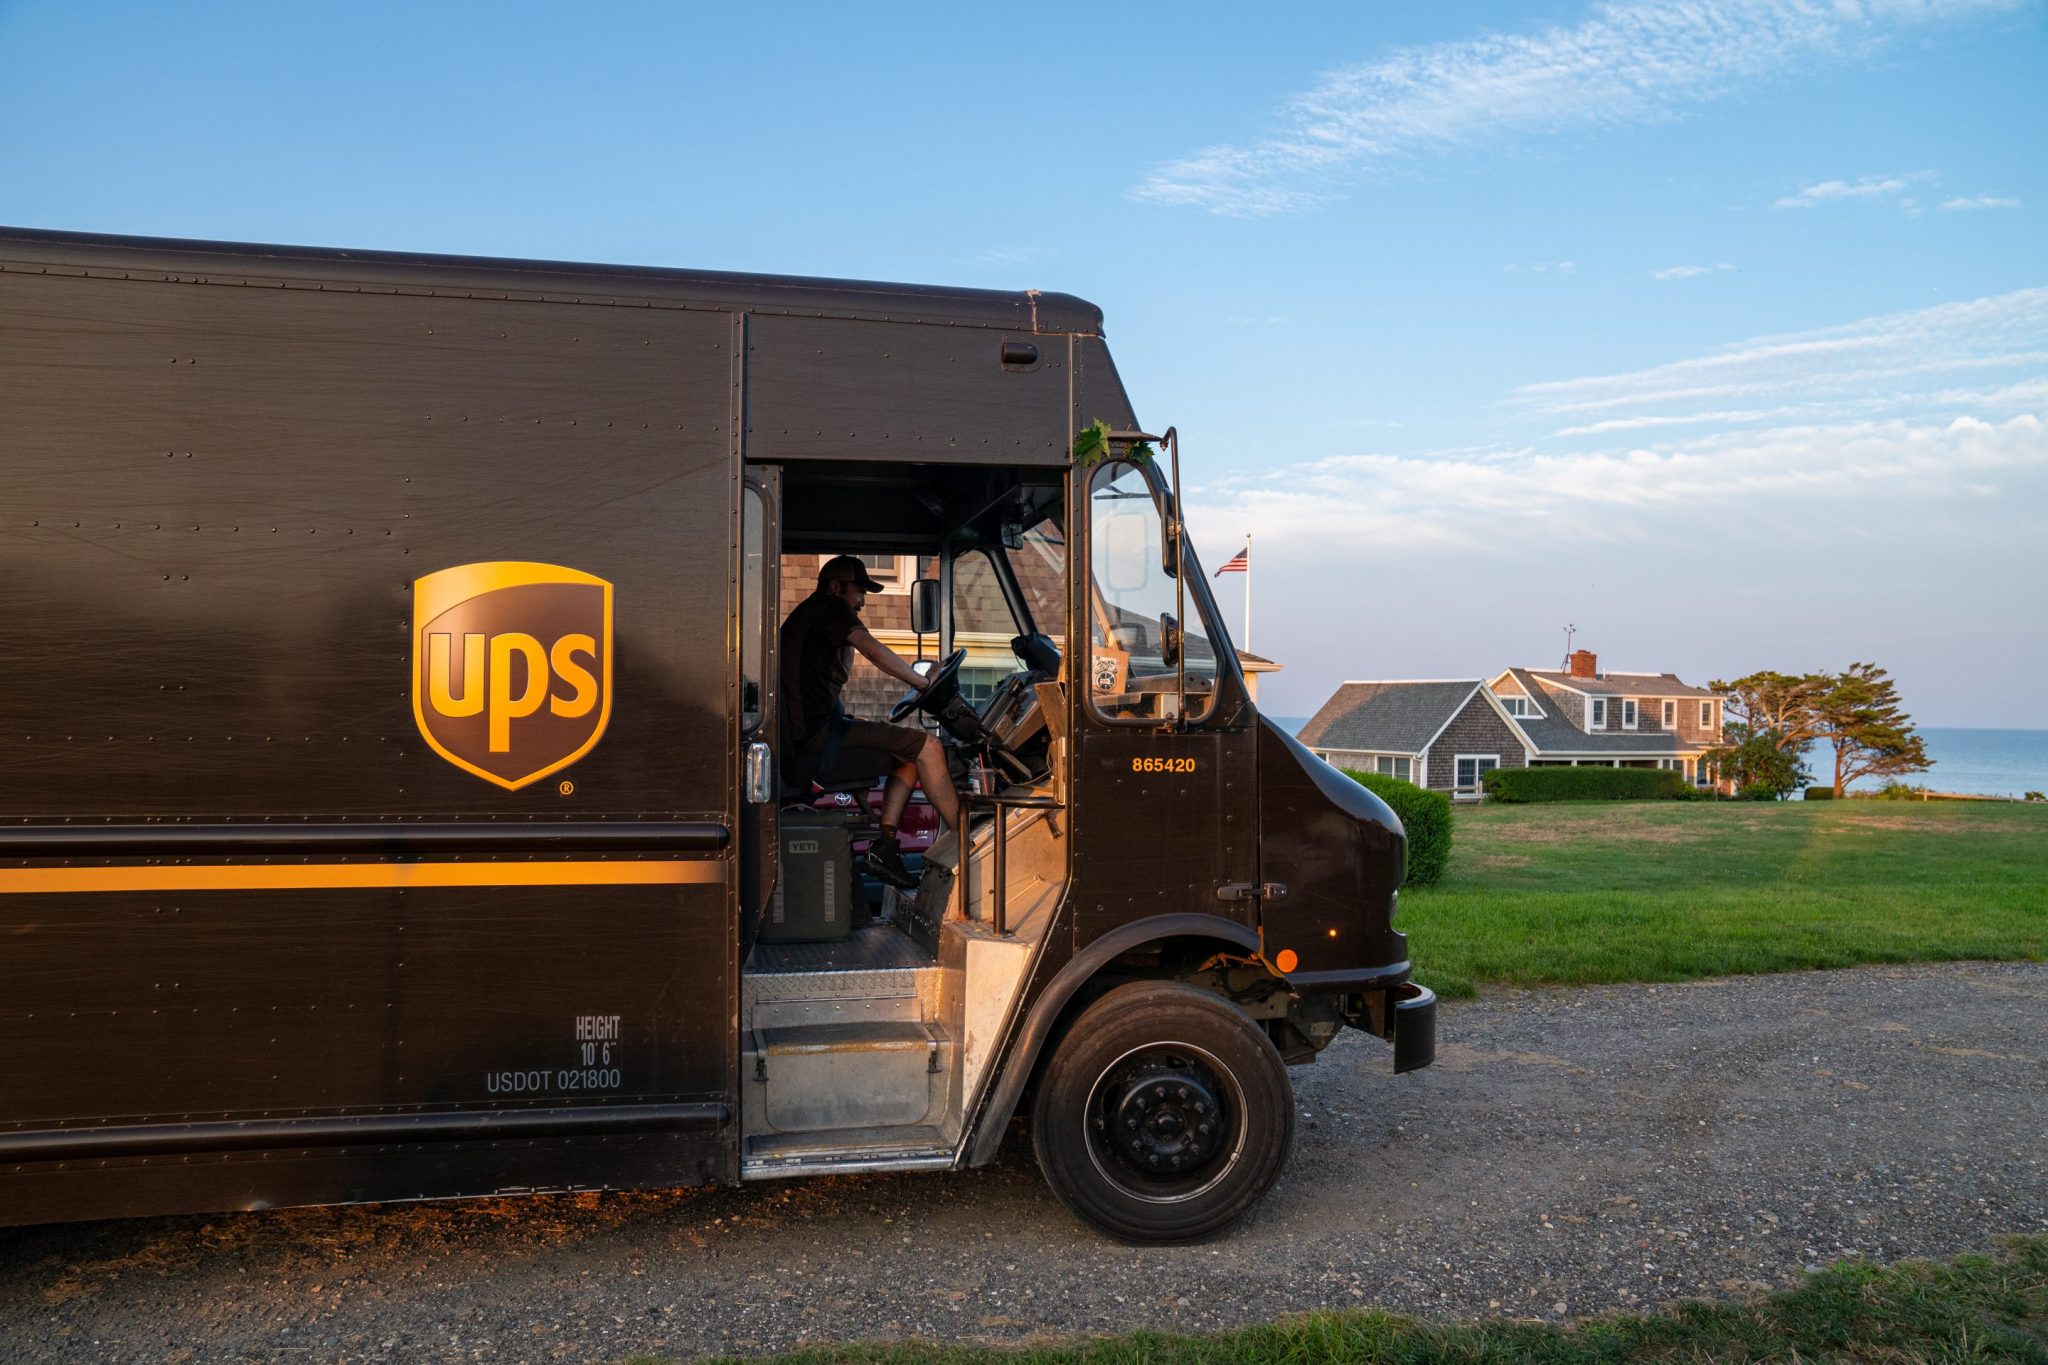 Unprotected by a union, managers at UPS take the hit for lost revenue